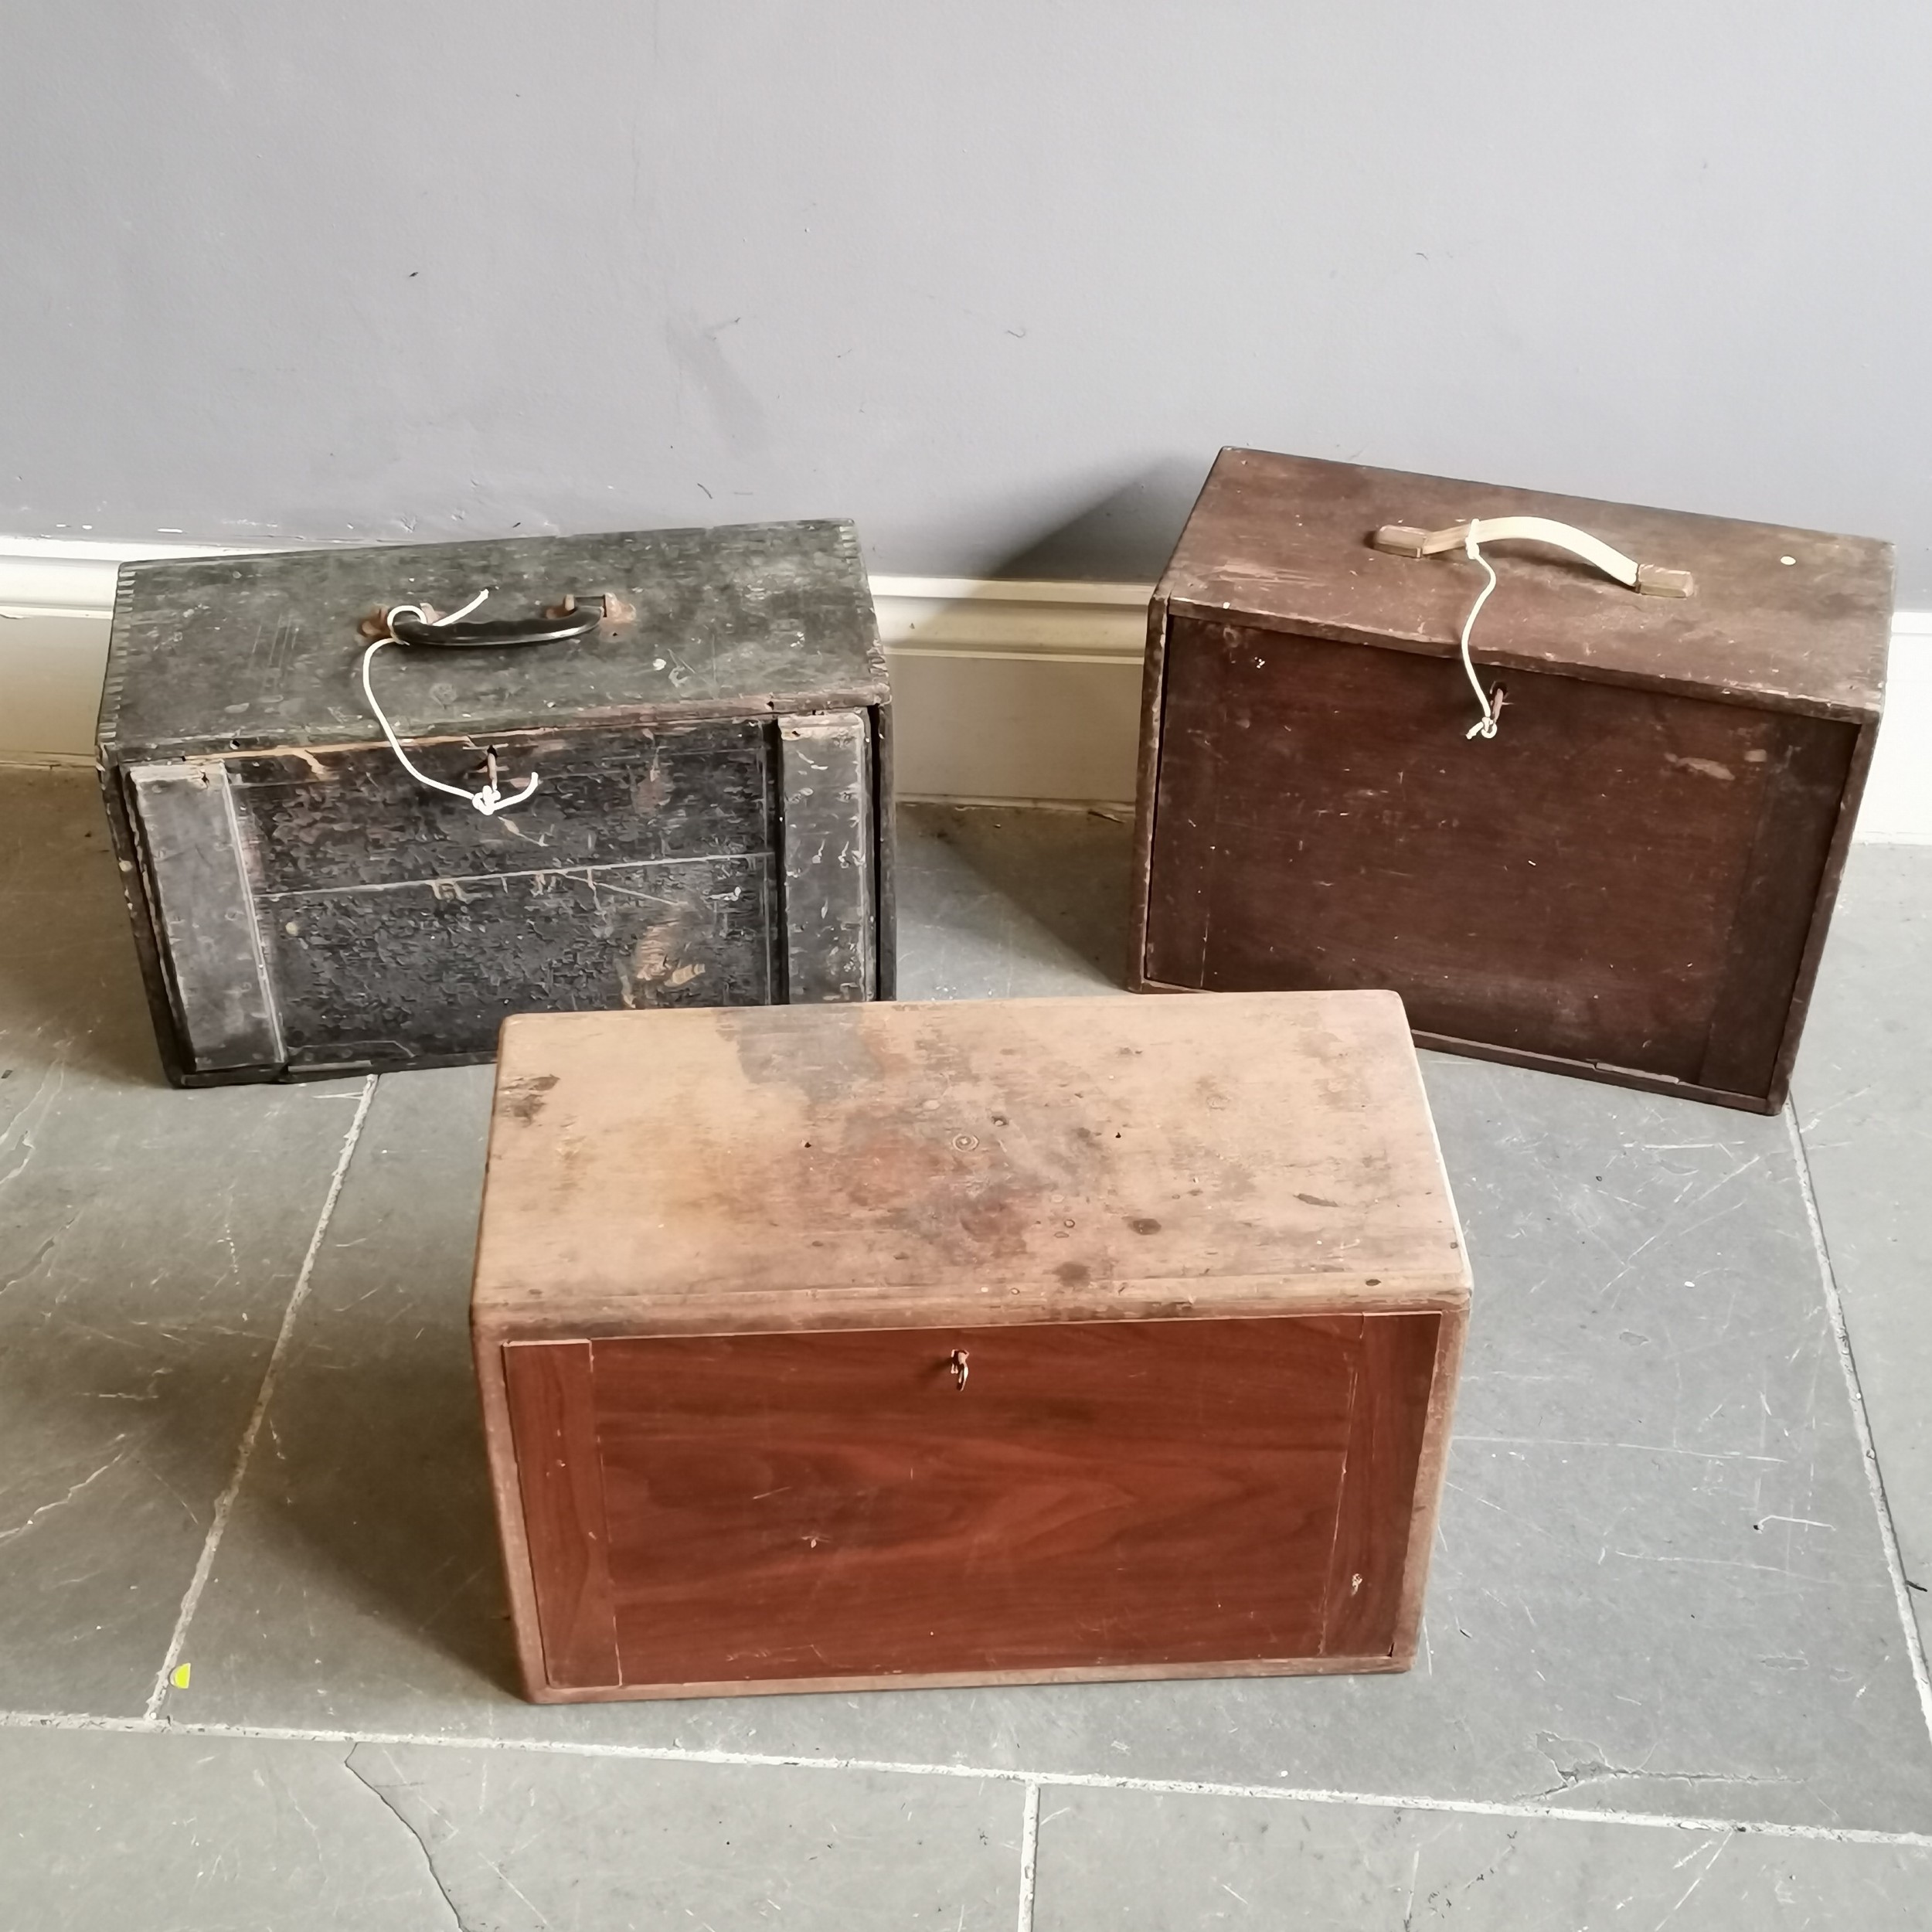 Vintage tool chest containing drawers, 43cm wide x 20cm deep x 30cm high, t/w 2 others., in used